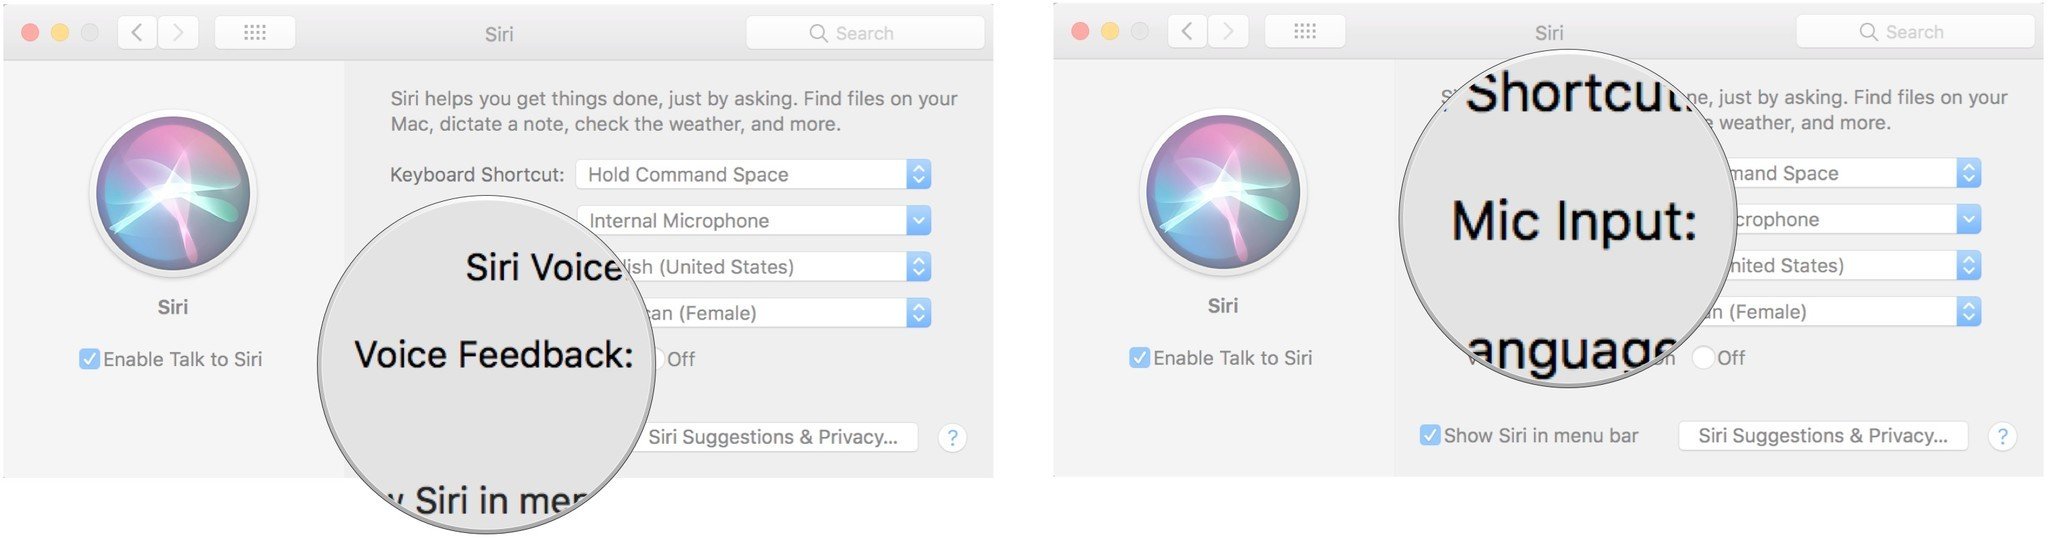 To enable Siri on the Mac, turn voice feedback on or off, then select a mic input.